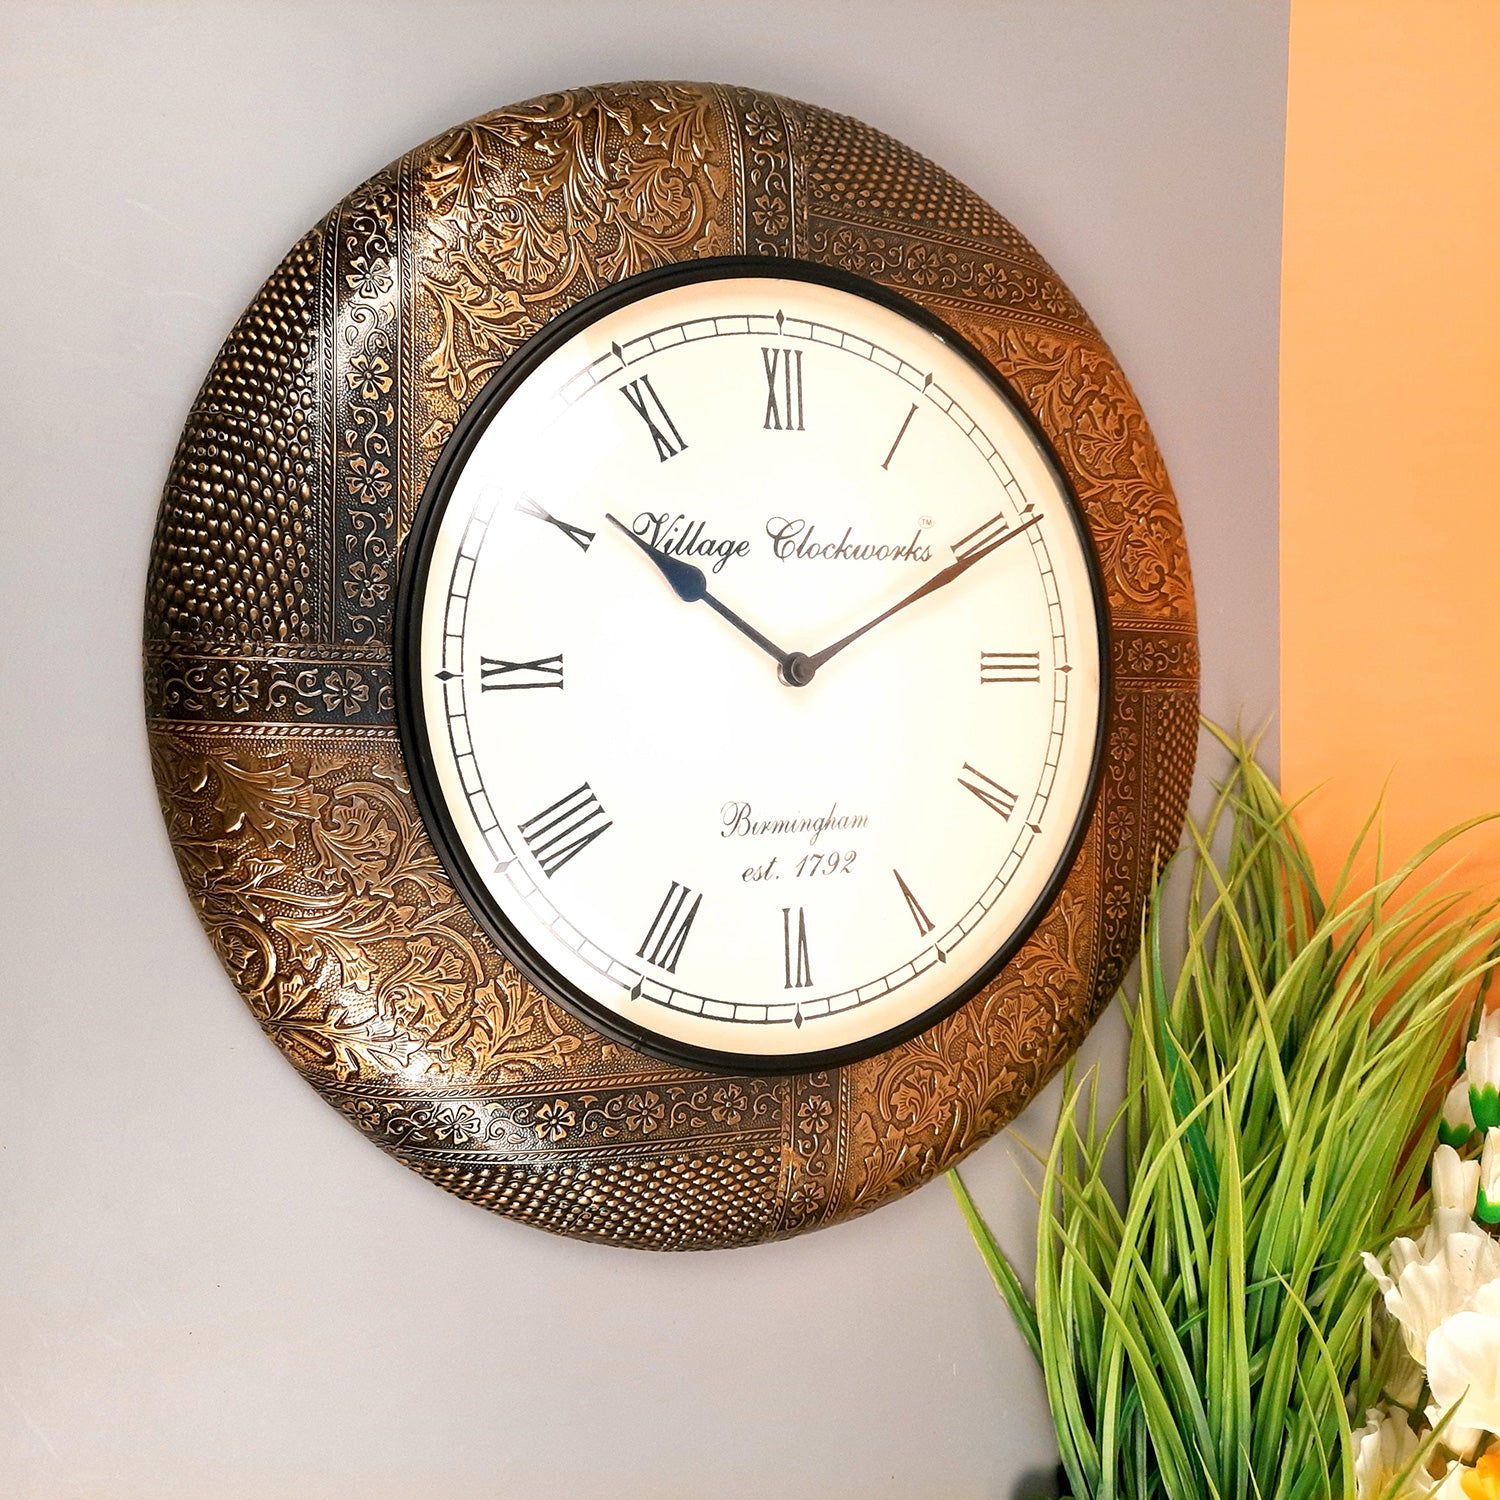 Wall Clock Vintage for Living Room | Wall Mount Clock Antique With Wood & Brass - For Home, Office, Bedroom, Hall Decor & Gifts | Wedding & Housewarming Gift -18 Inch - Apkamart